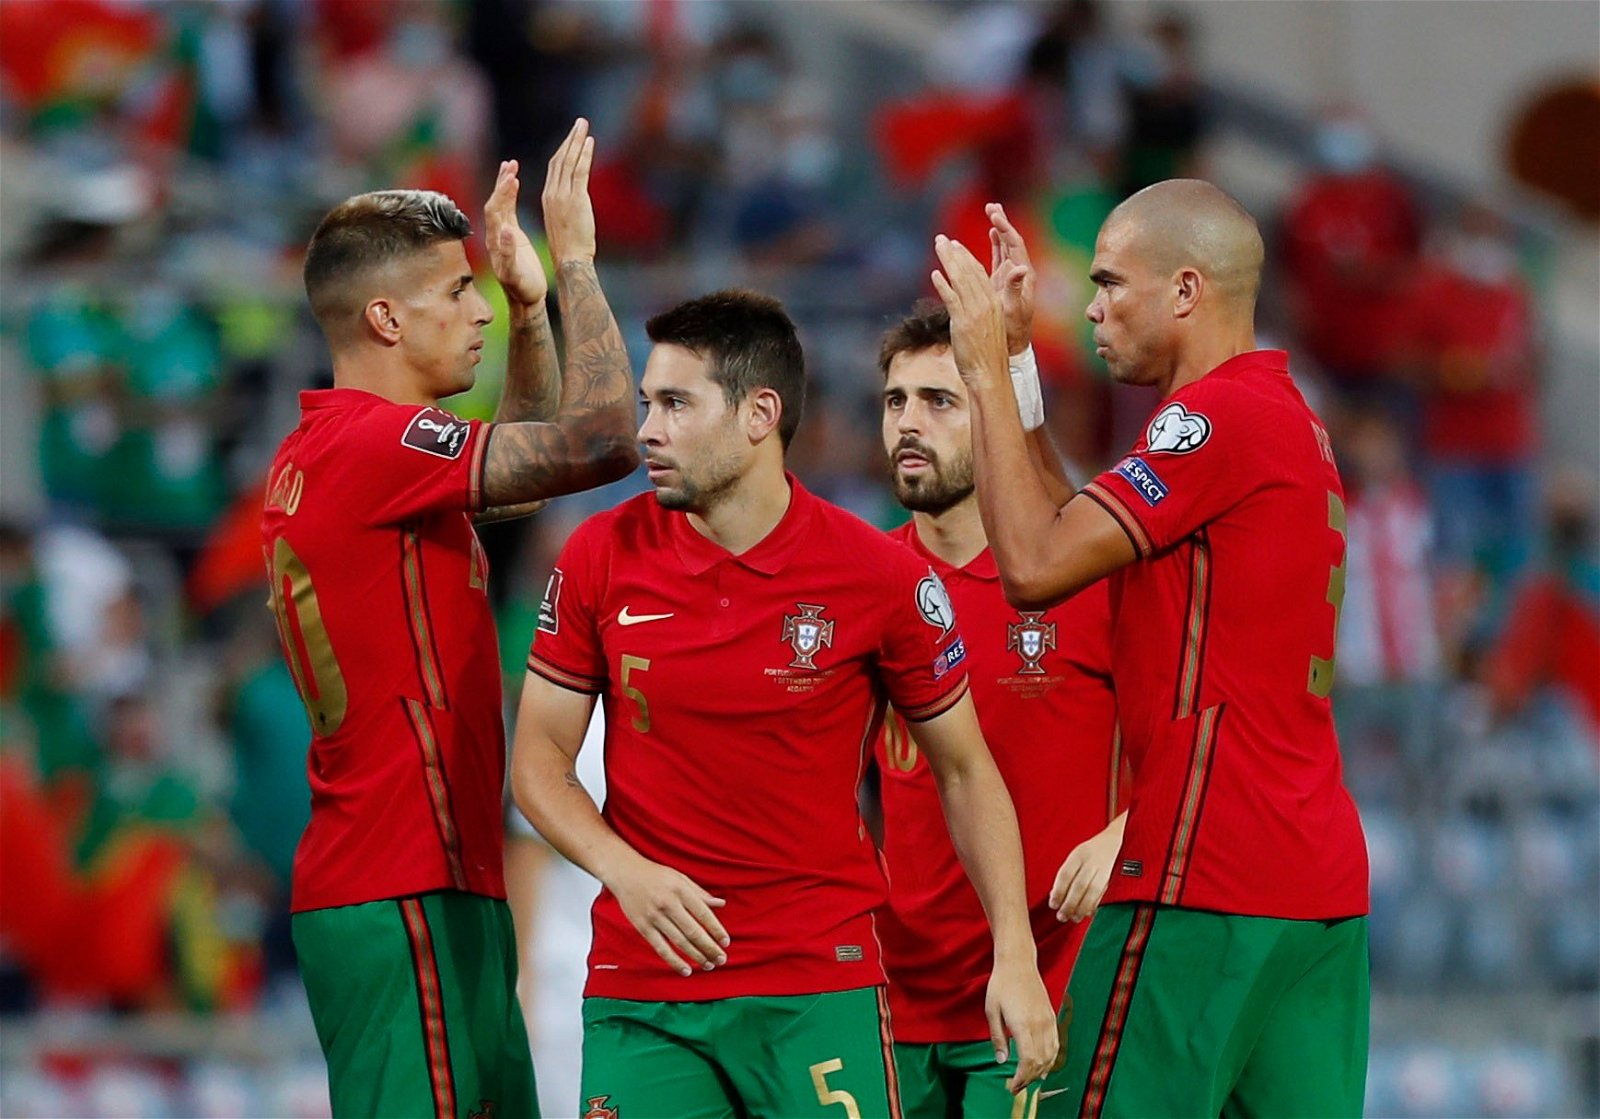 Portugal World Cup squad